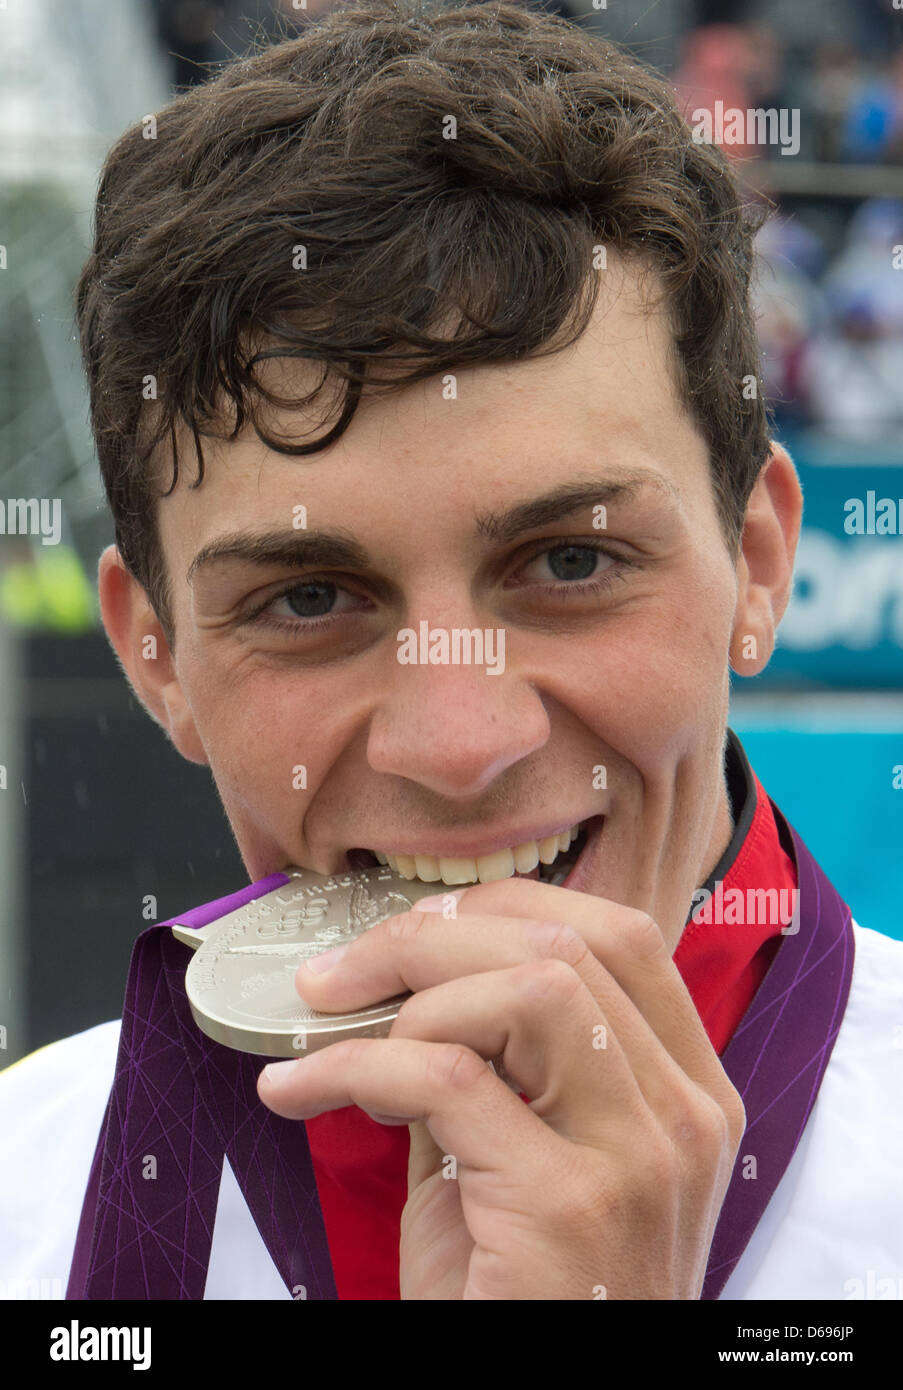 Germany's Sideris Tasiadis shows his silvermedal after the final race in the Canoe Slalom Men's Single competition at Lee Valley White Water Centre, during the London 2012 Olympic Games, London, Great Britain, 31 July 2012. Photo: Peter Kneffel dpa  +++(c) dpa - Bildfunk+++ Stock Photo